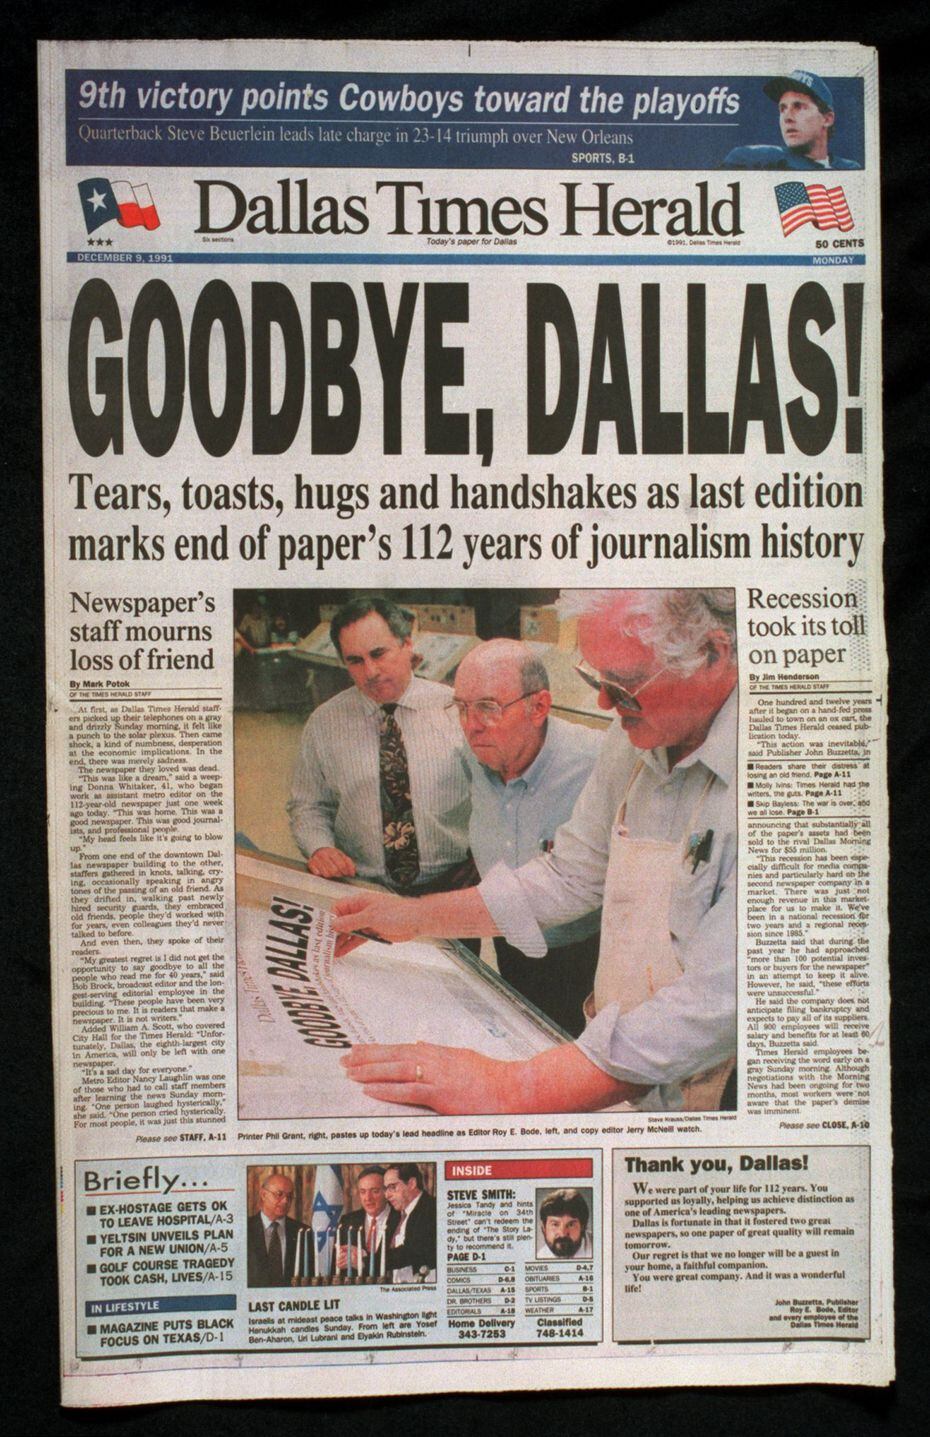 The Dallas Times Herald bids Dallas goodbye, ending 112 years of journalism history on Dec....